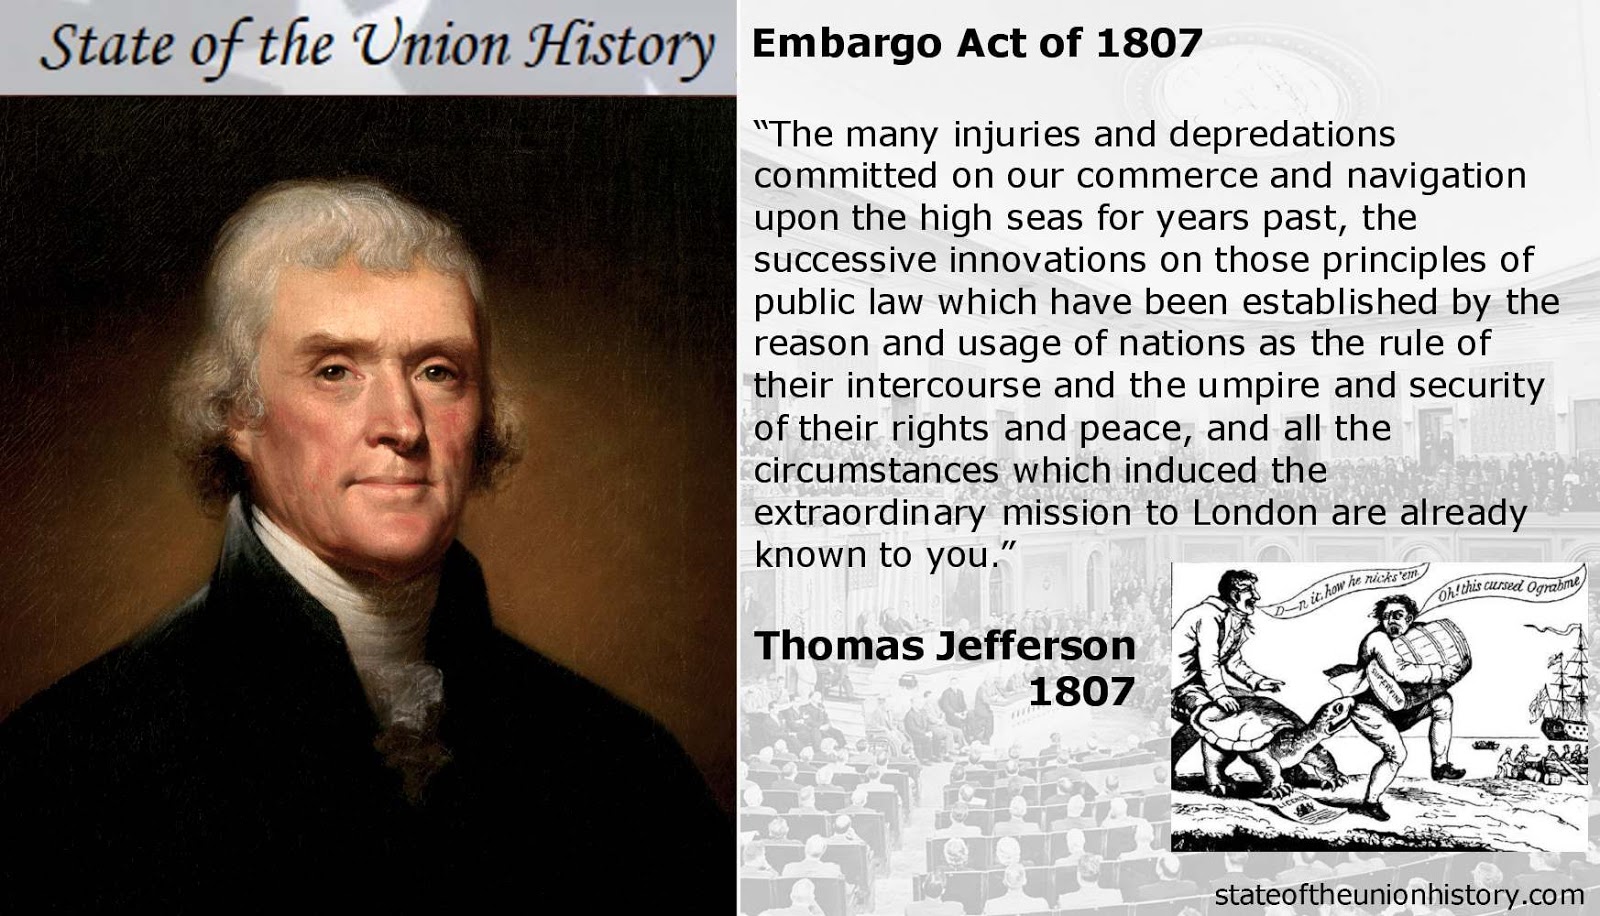 1807 Thomas Jefferson - Embargo Act of 1807 | State of the Union History